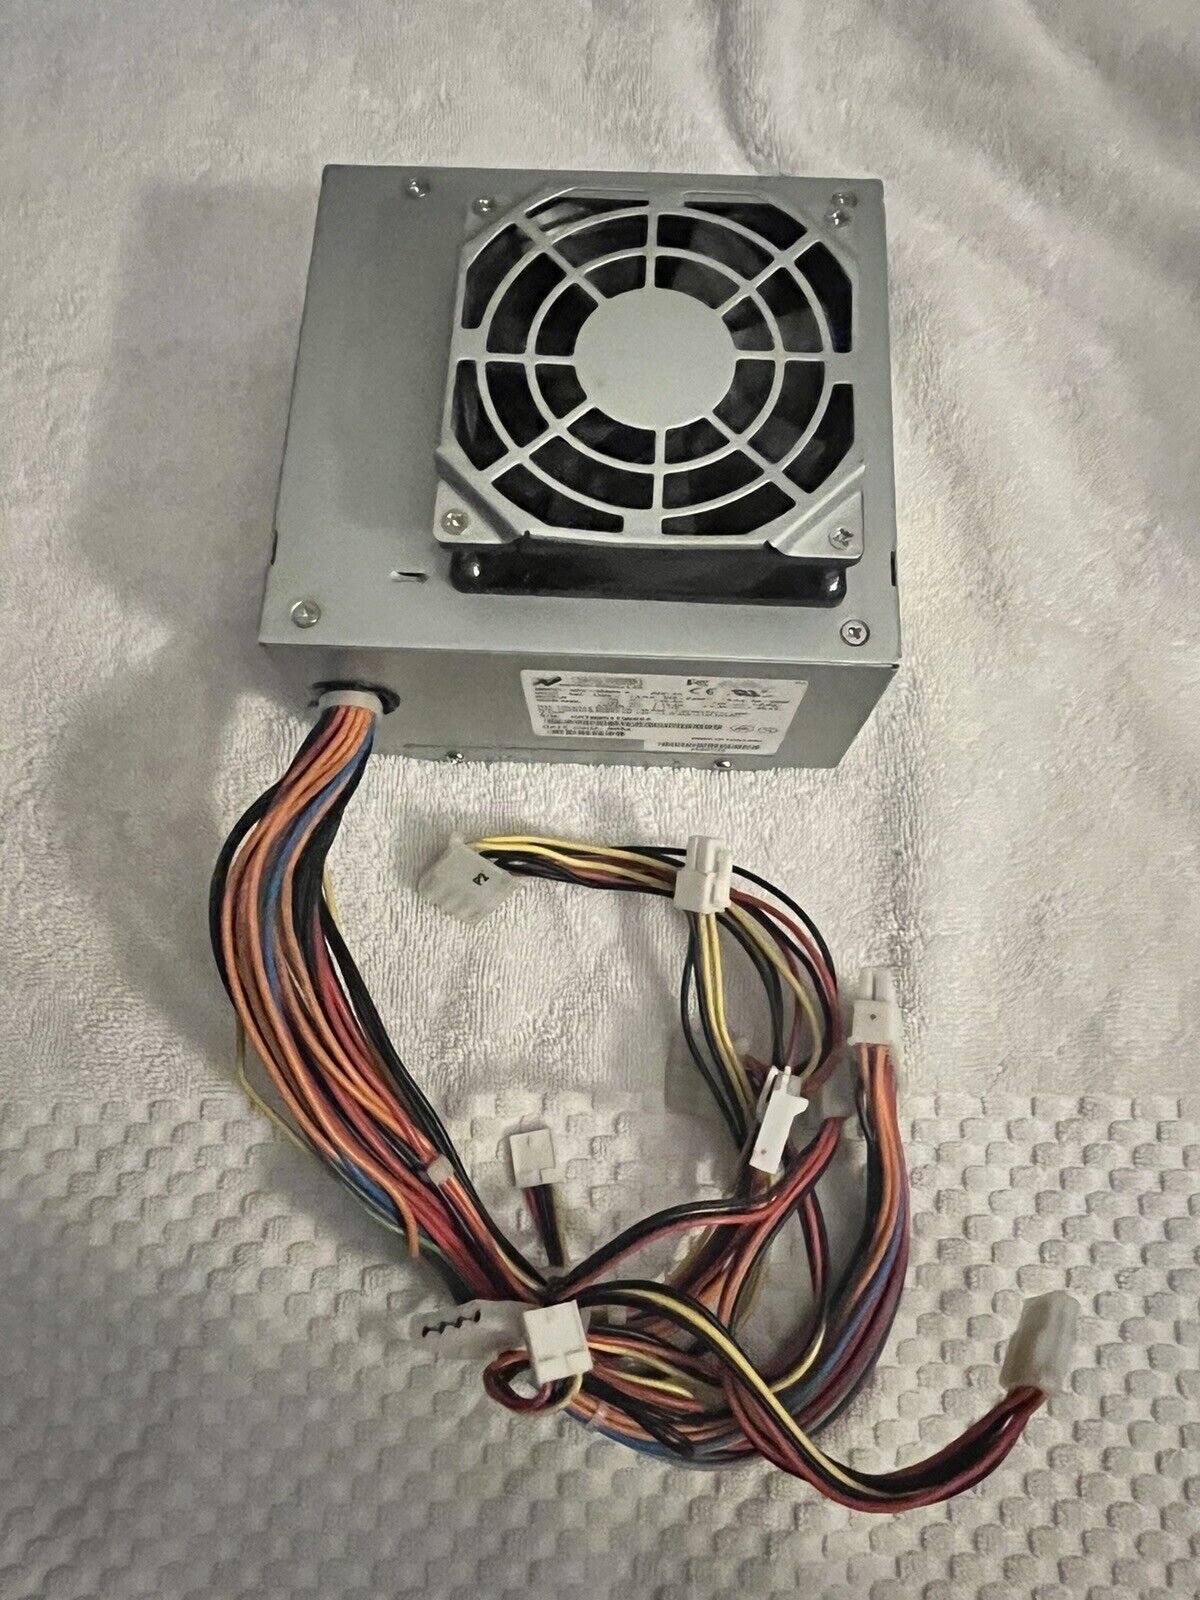 **NPS-250CB A NEWTON POWER LTD COMPATIBLE ACCESSIBLE - 250W ATX POWER SUPPLY